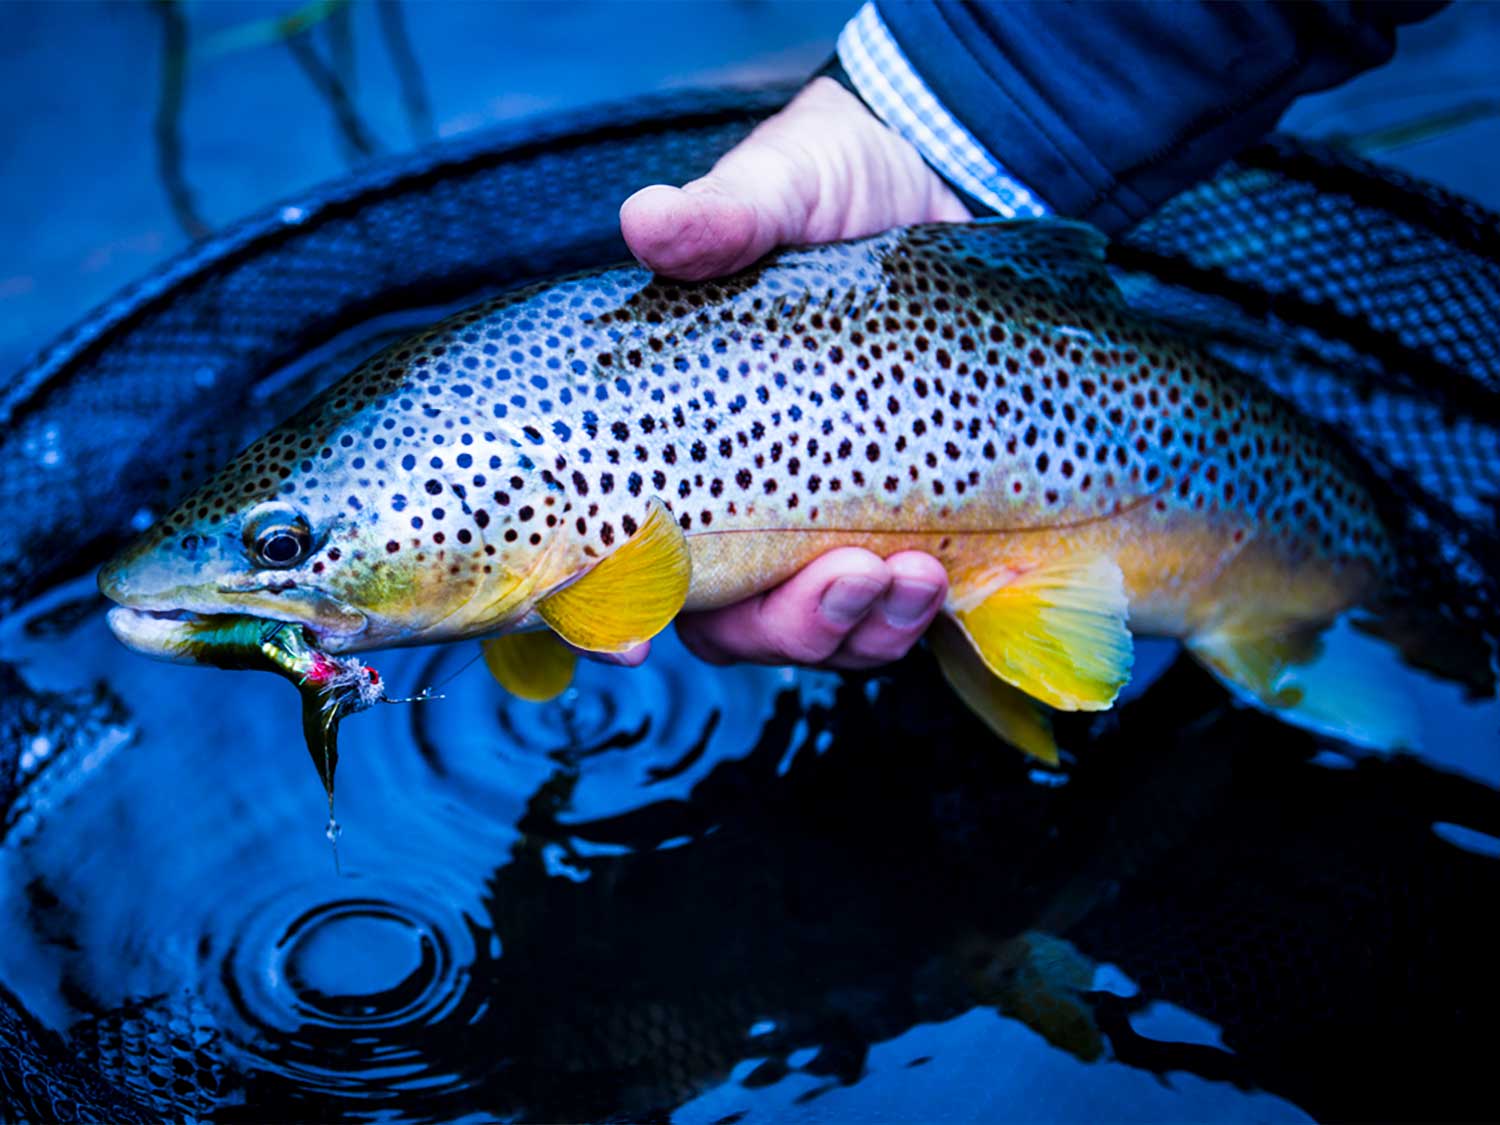 Engberg: Winter brown trout fishing